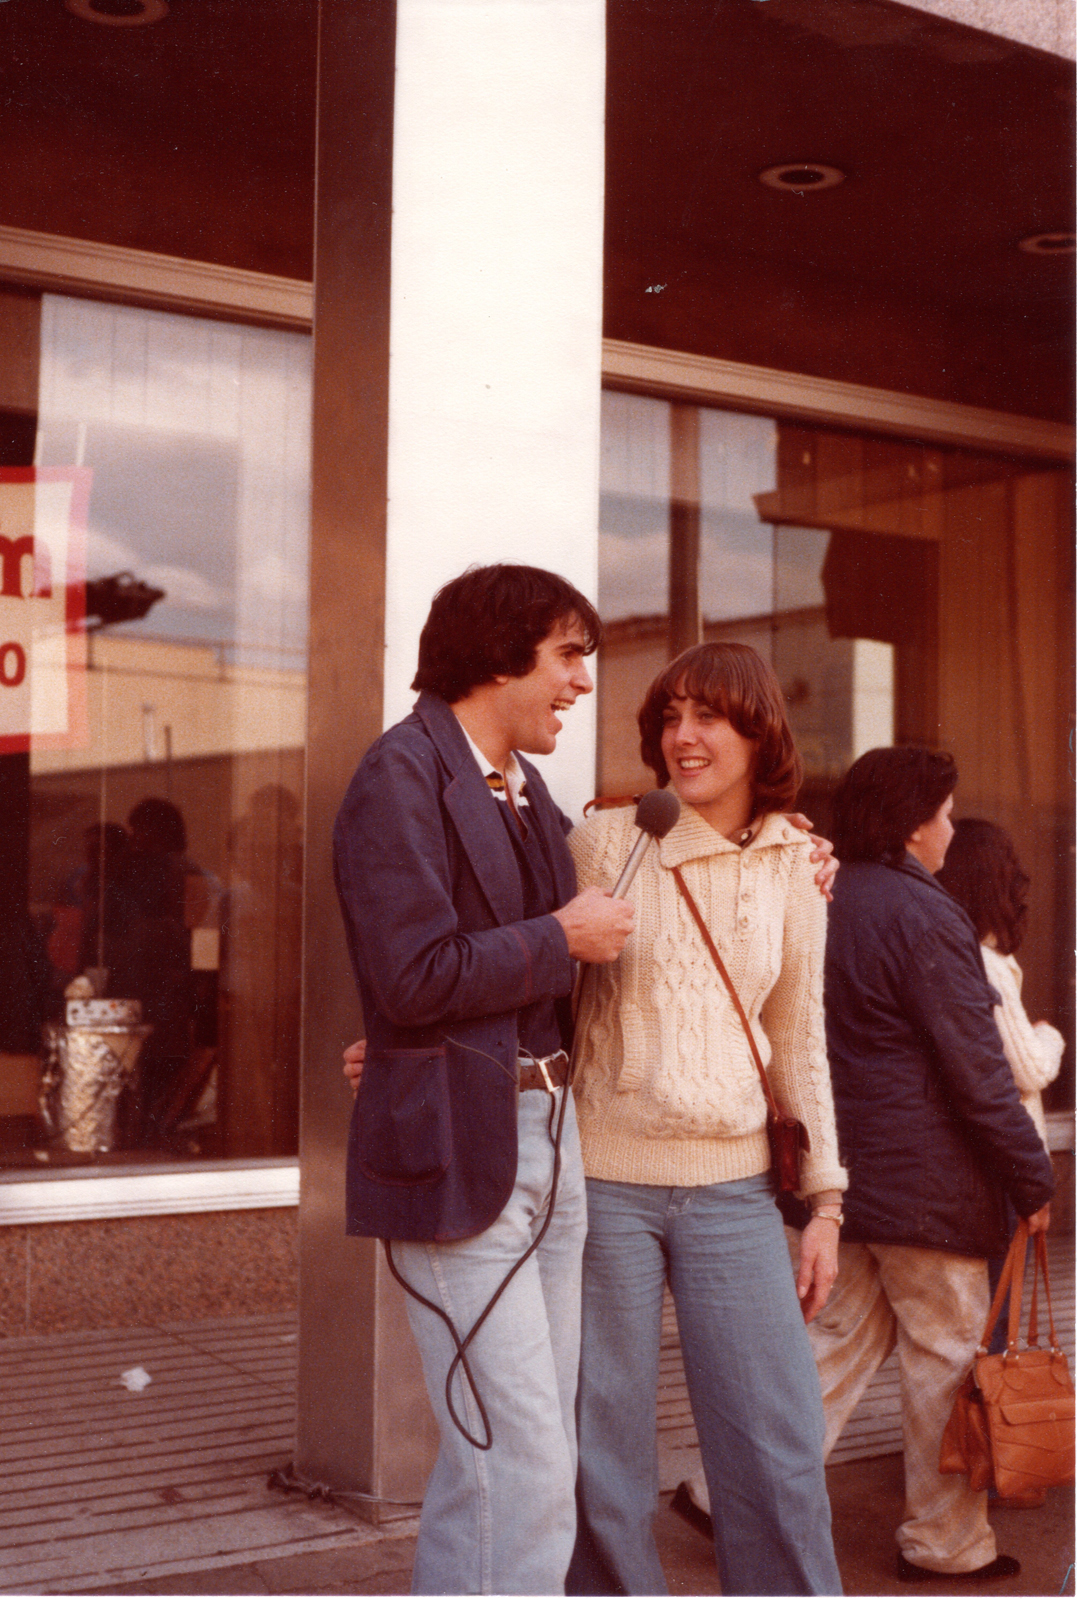 May 1978 George St Festival - Rick Capriolla, Janet Fabro - Live from Inside in the PJ Young Window!